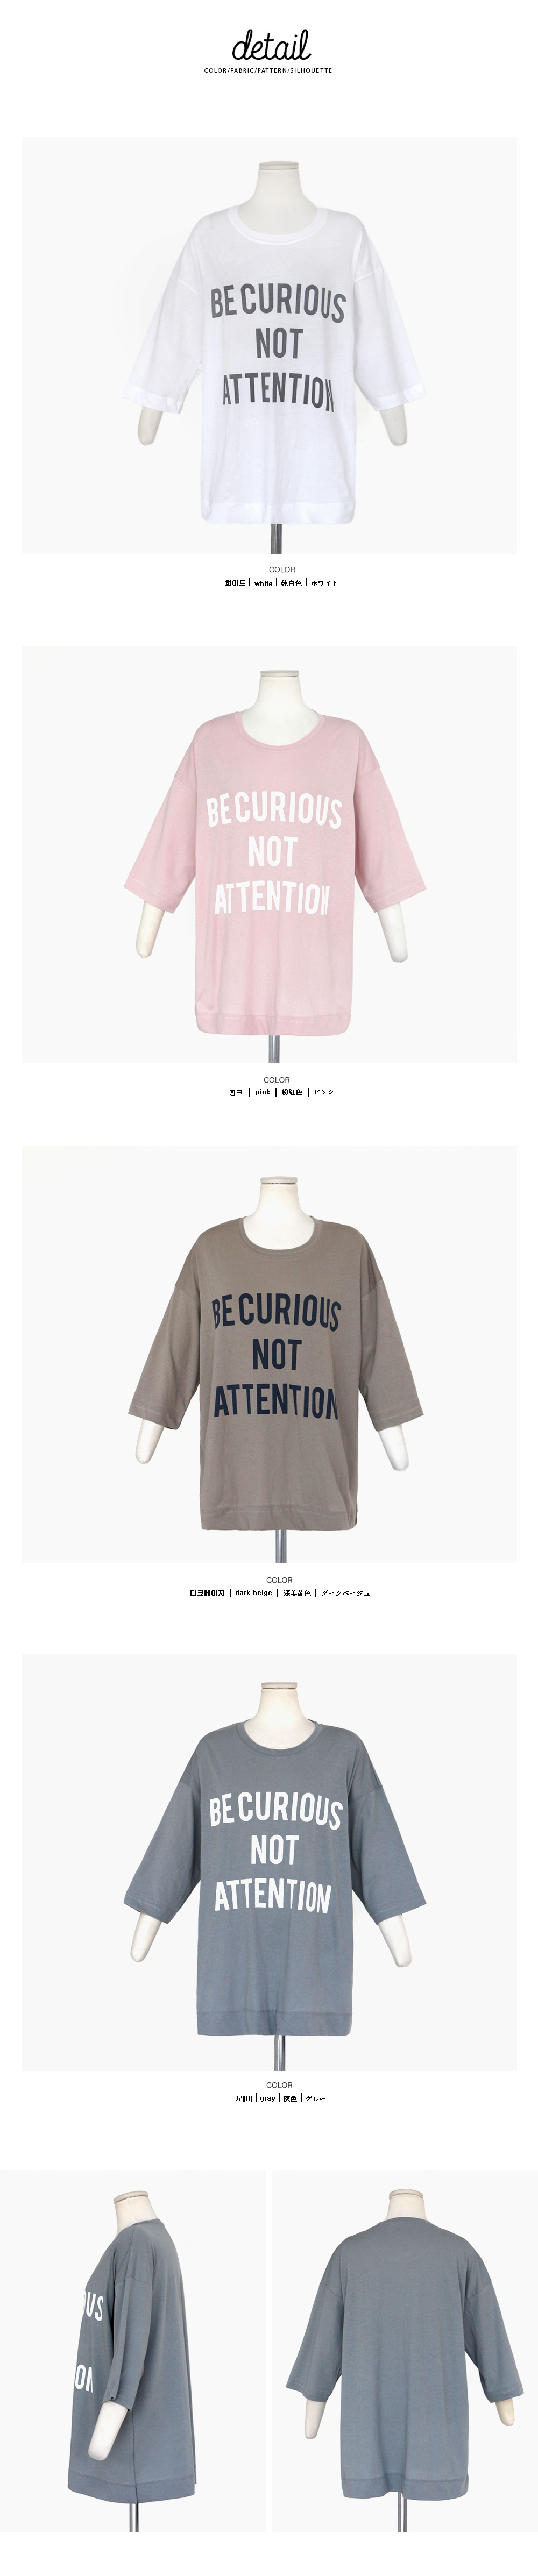 BE CURIOUS NOT ATTENTIONロゴTシャツ・全4色 | DHOLIC | 詳細画像16